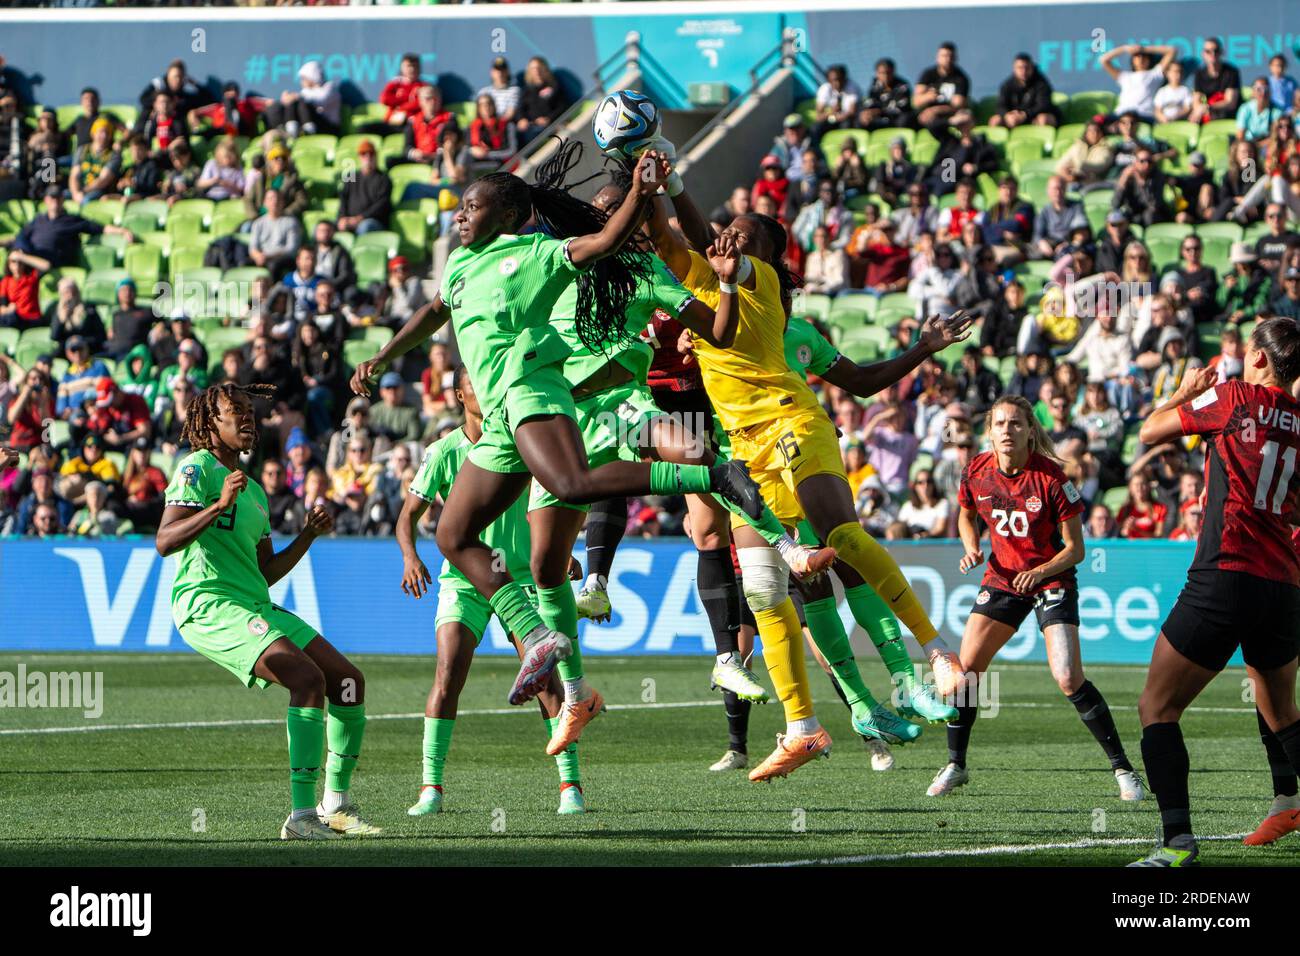 Melbourne, Australia. 21st July, 2023. Melbourne, Australia, July 21st 2023: Goalkeeper Chiamaka Nnadozie (16 Nigeria) punches the ball in traffic during the 2023 FIFA Womens World Cup football match between Nigeria and Canada at Melbourne Rectangular Stadium in Melbourne, Australia. (Noe Llamas/SPP) Credit: SPP Sport Press Photo. /Alamy Live News Stock Photo